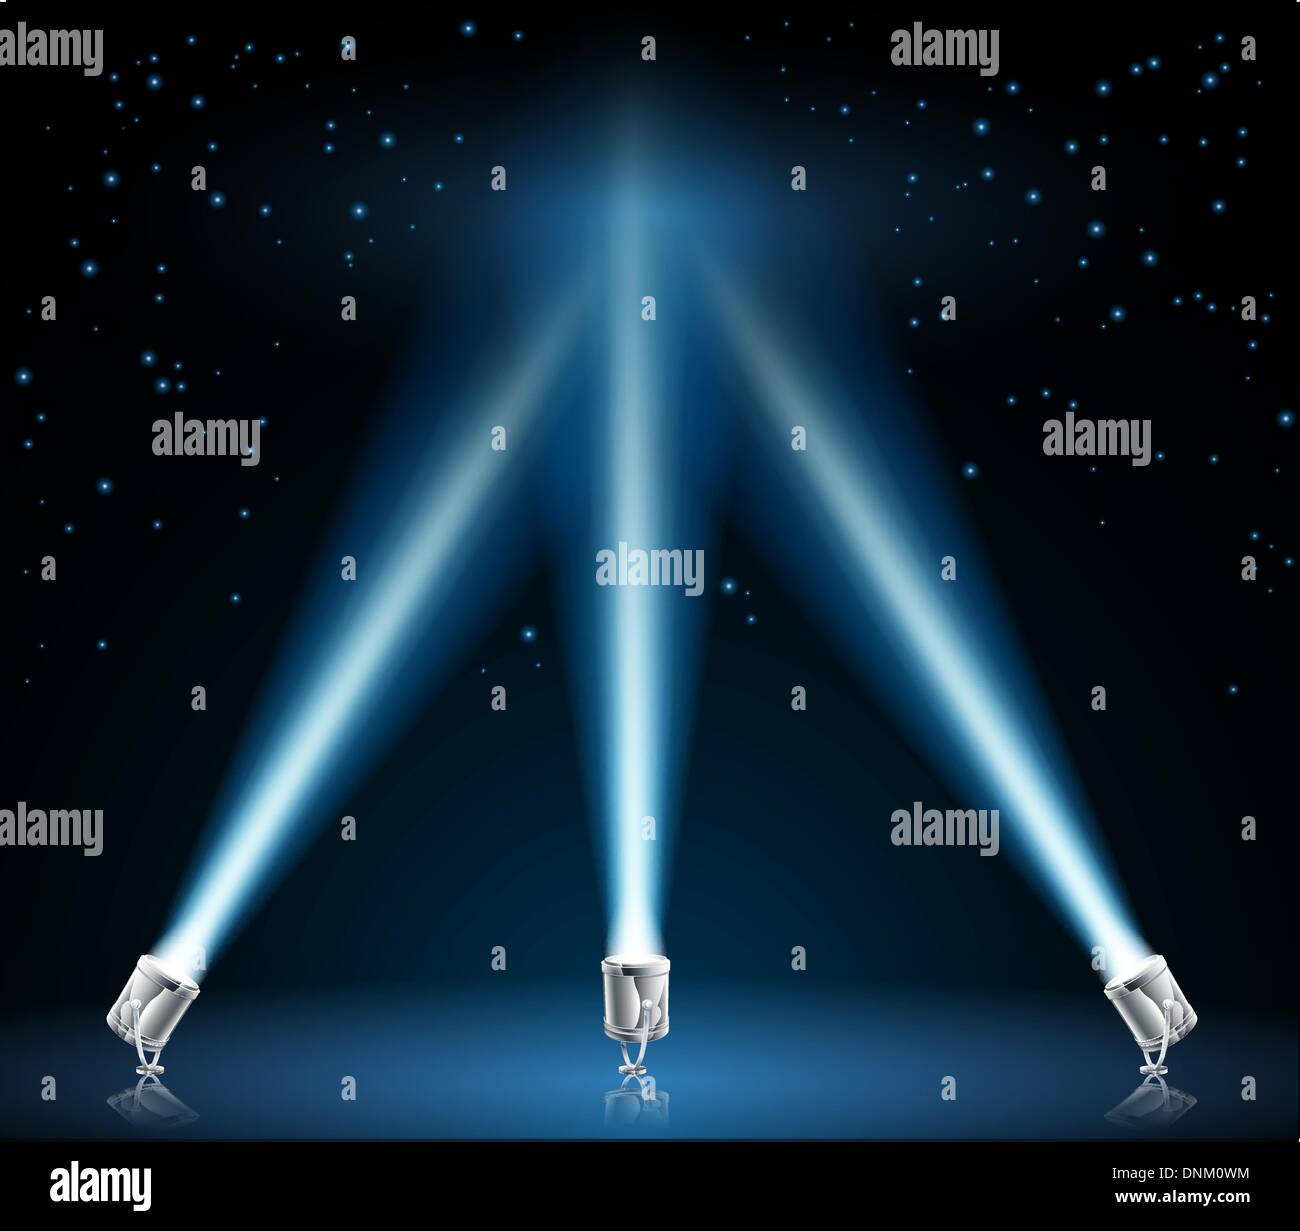 Illustration of searchlights or spotlights pointing into the night sky Stock Vector